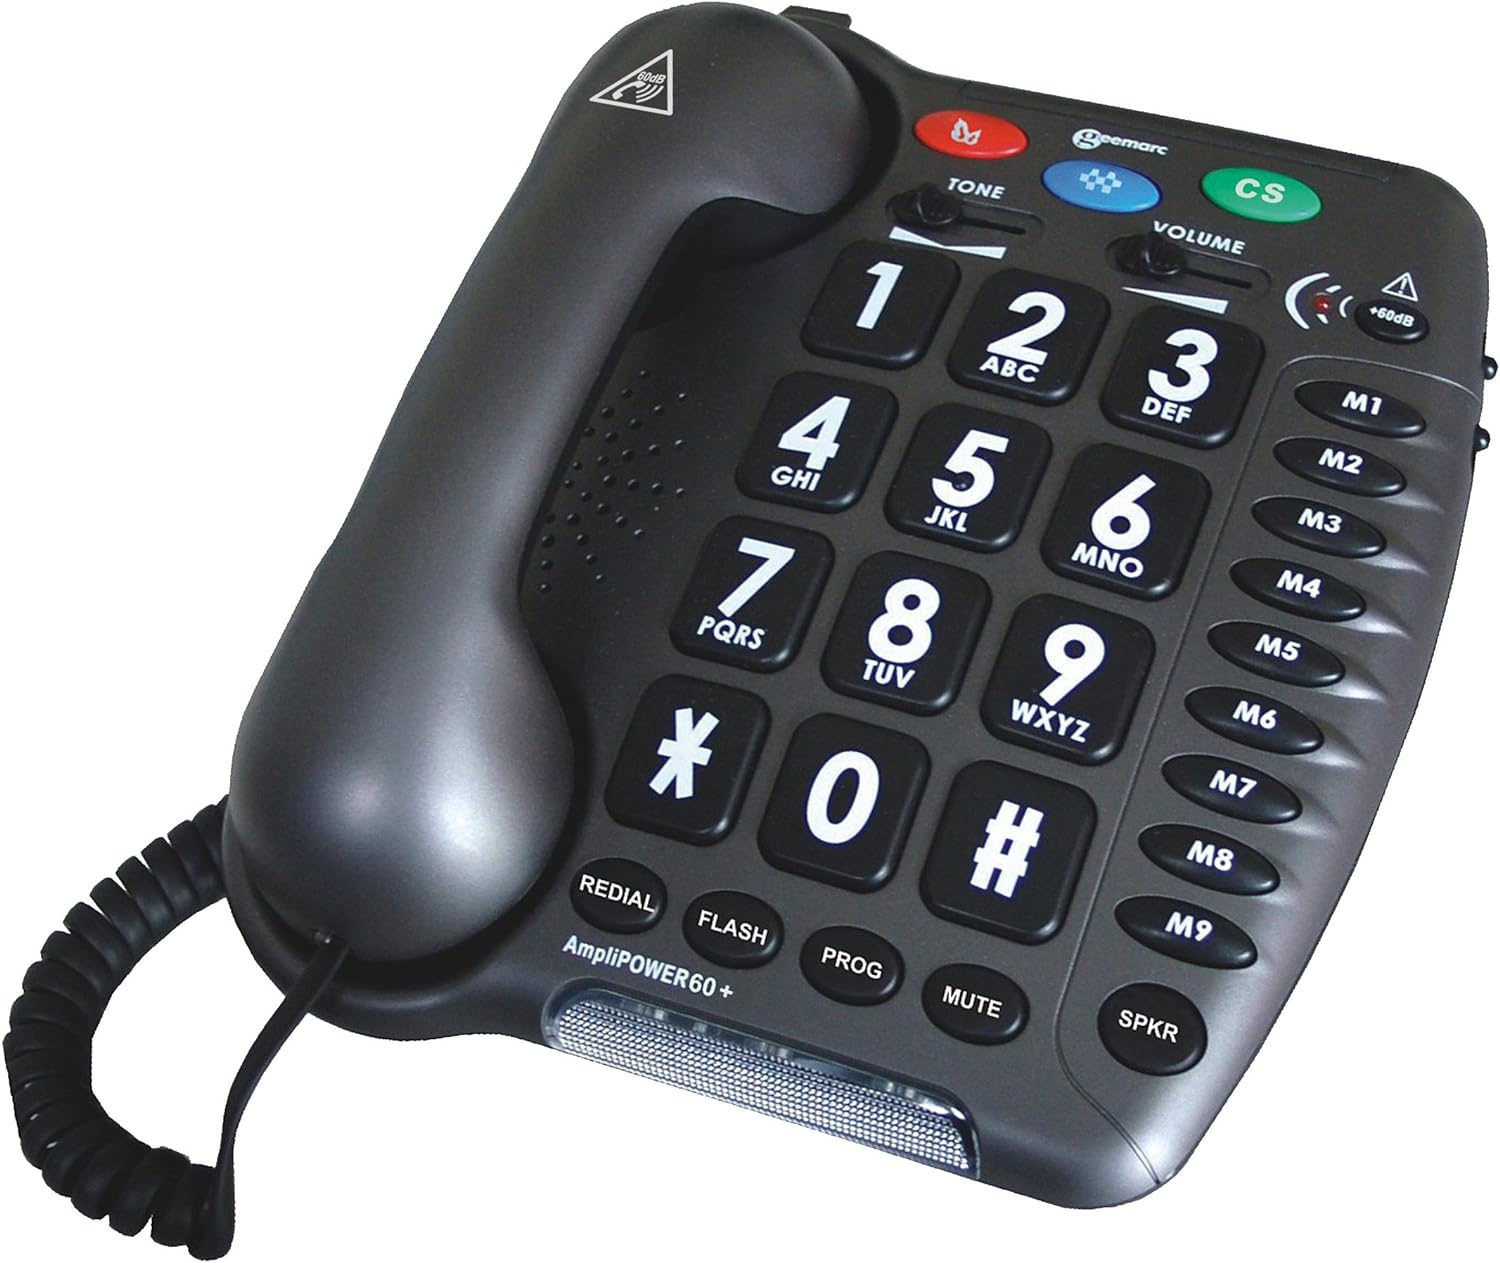 GEEMARC AMPLIPOWER60+ EXTRA LOUD AMPLIFICATED (UP TO 67dB) BIG BUTTON SPEAKERPHONE TELEPHONE